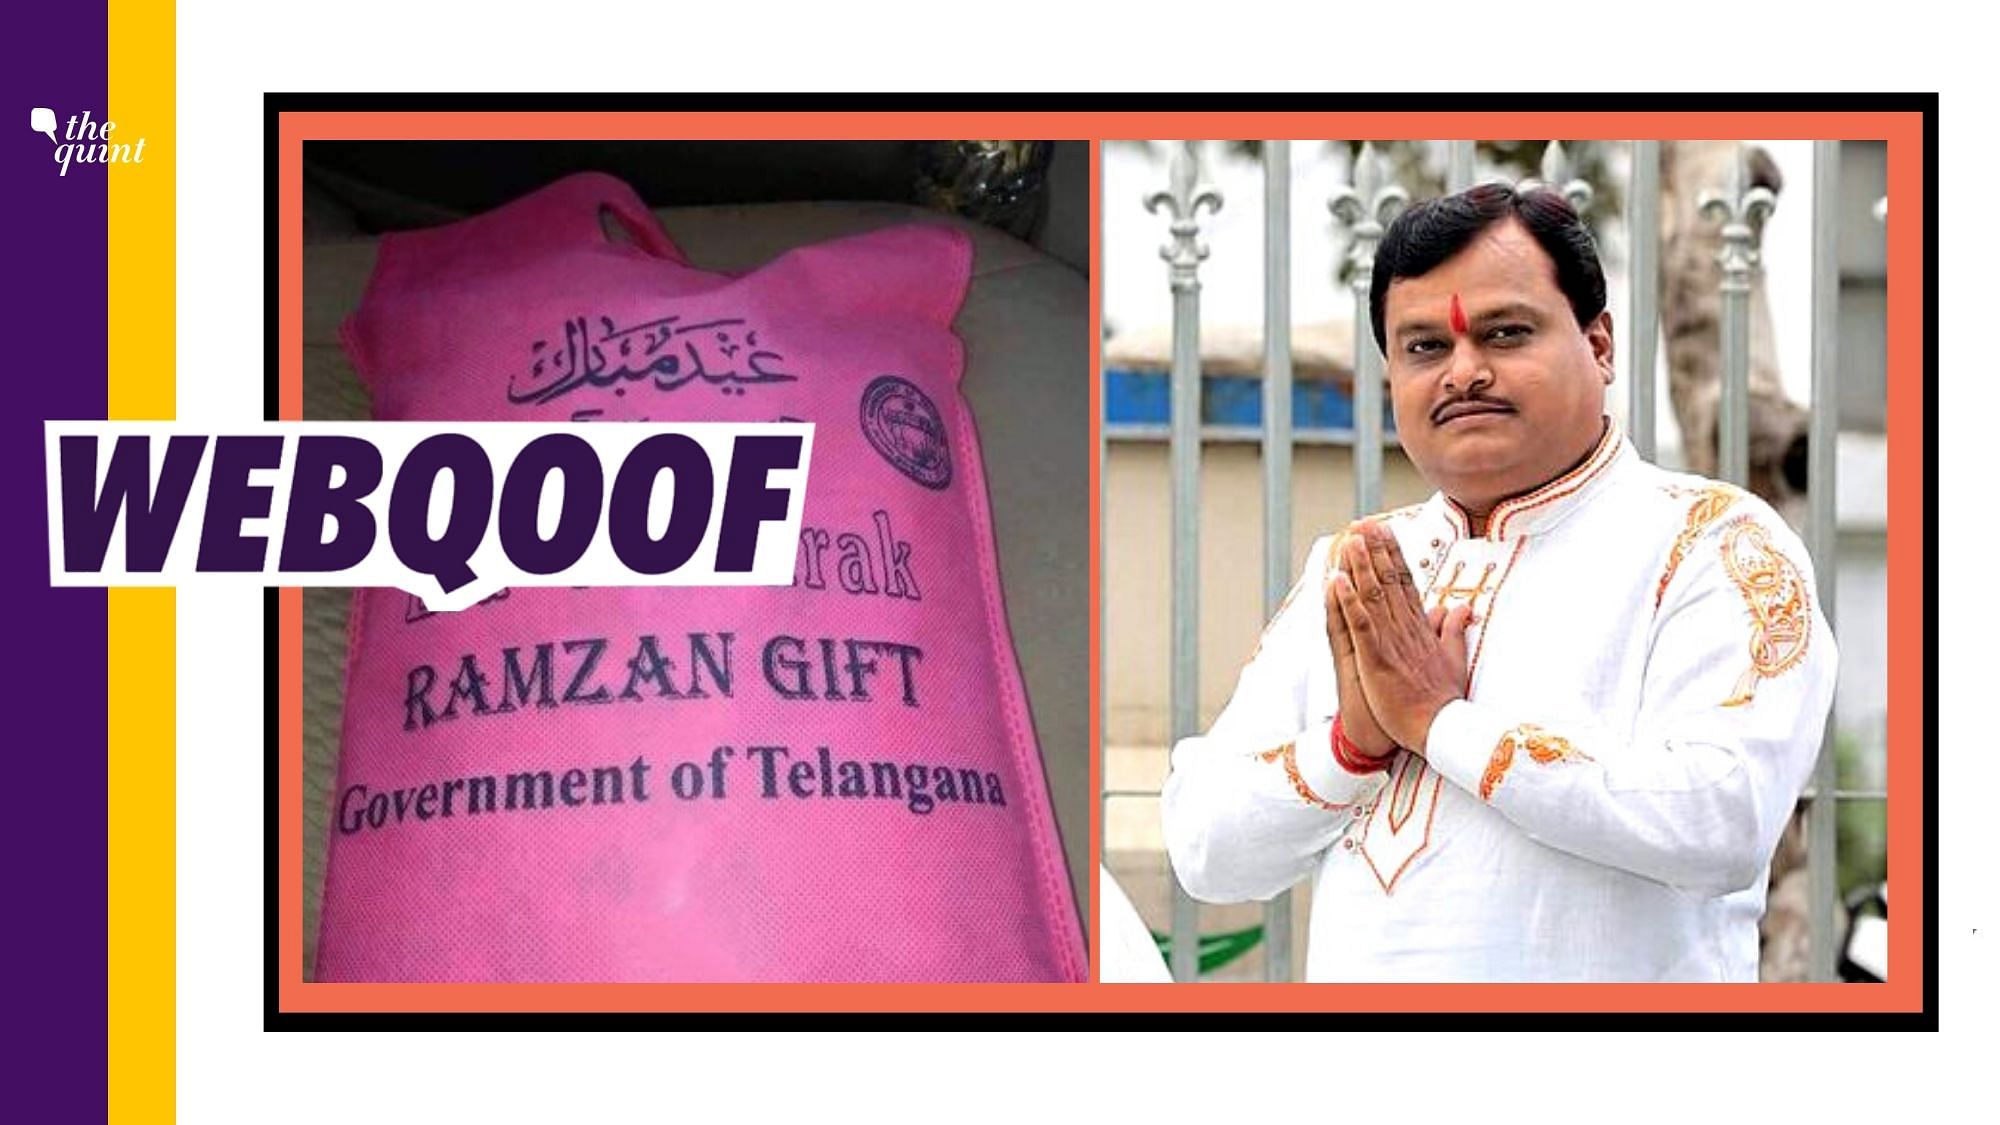 Sudharshan News editor-in-chief, Suresh Chavhanke used an old image to falsely claim that the Telangana government is distributing Ramzan gifts during COVID outbreak.